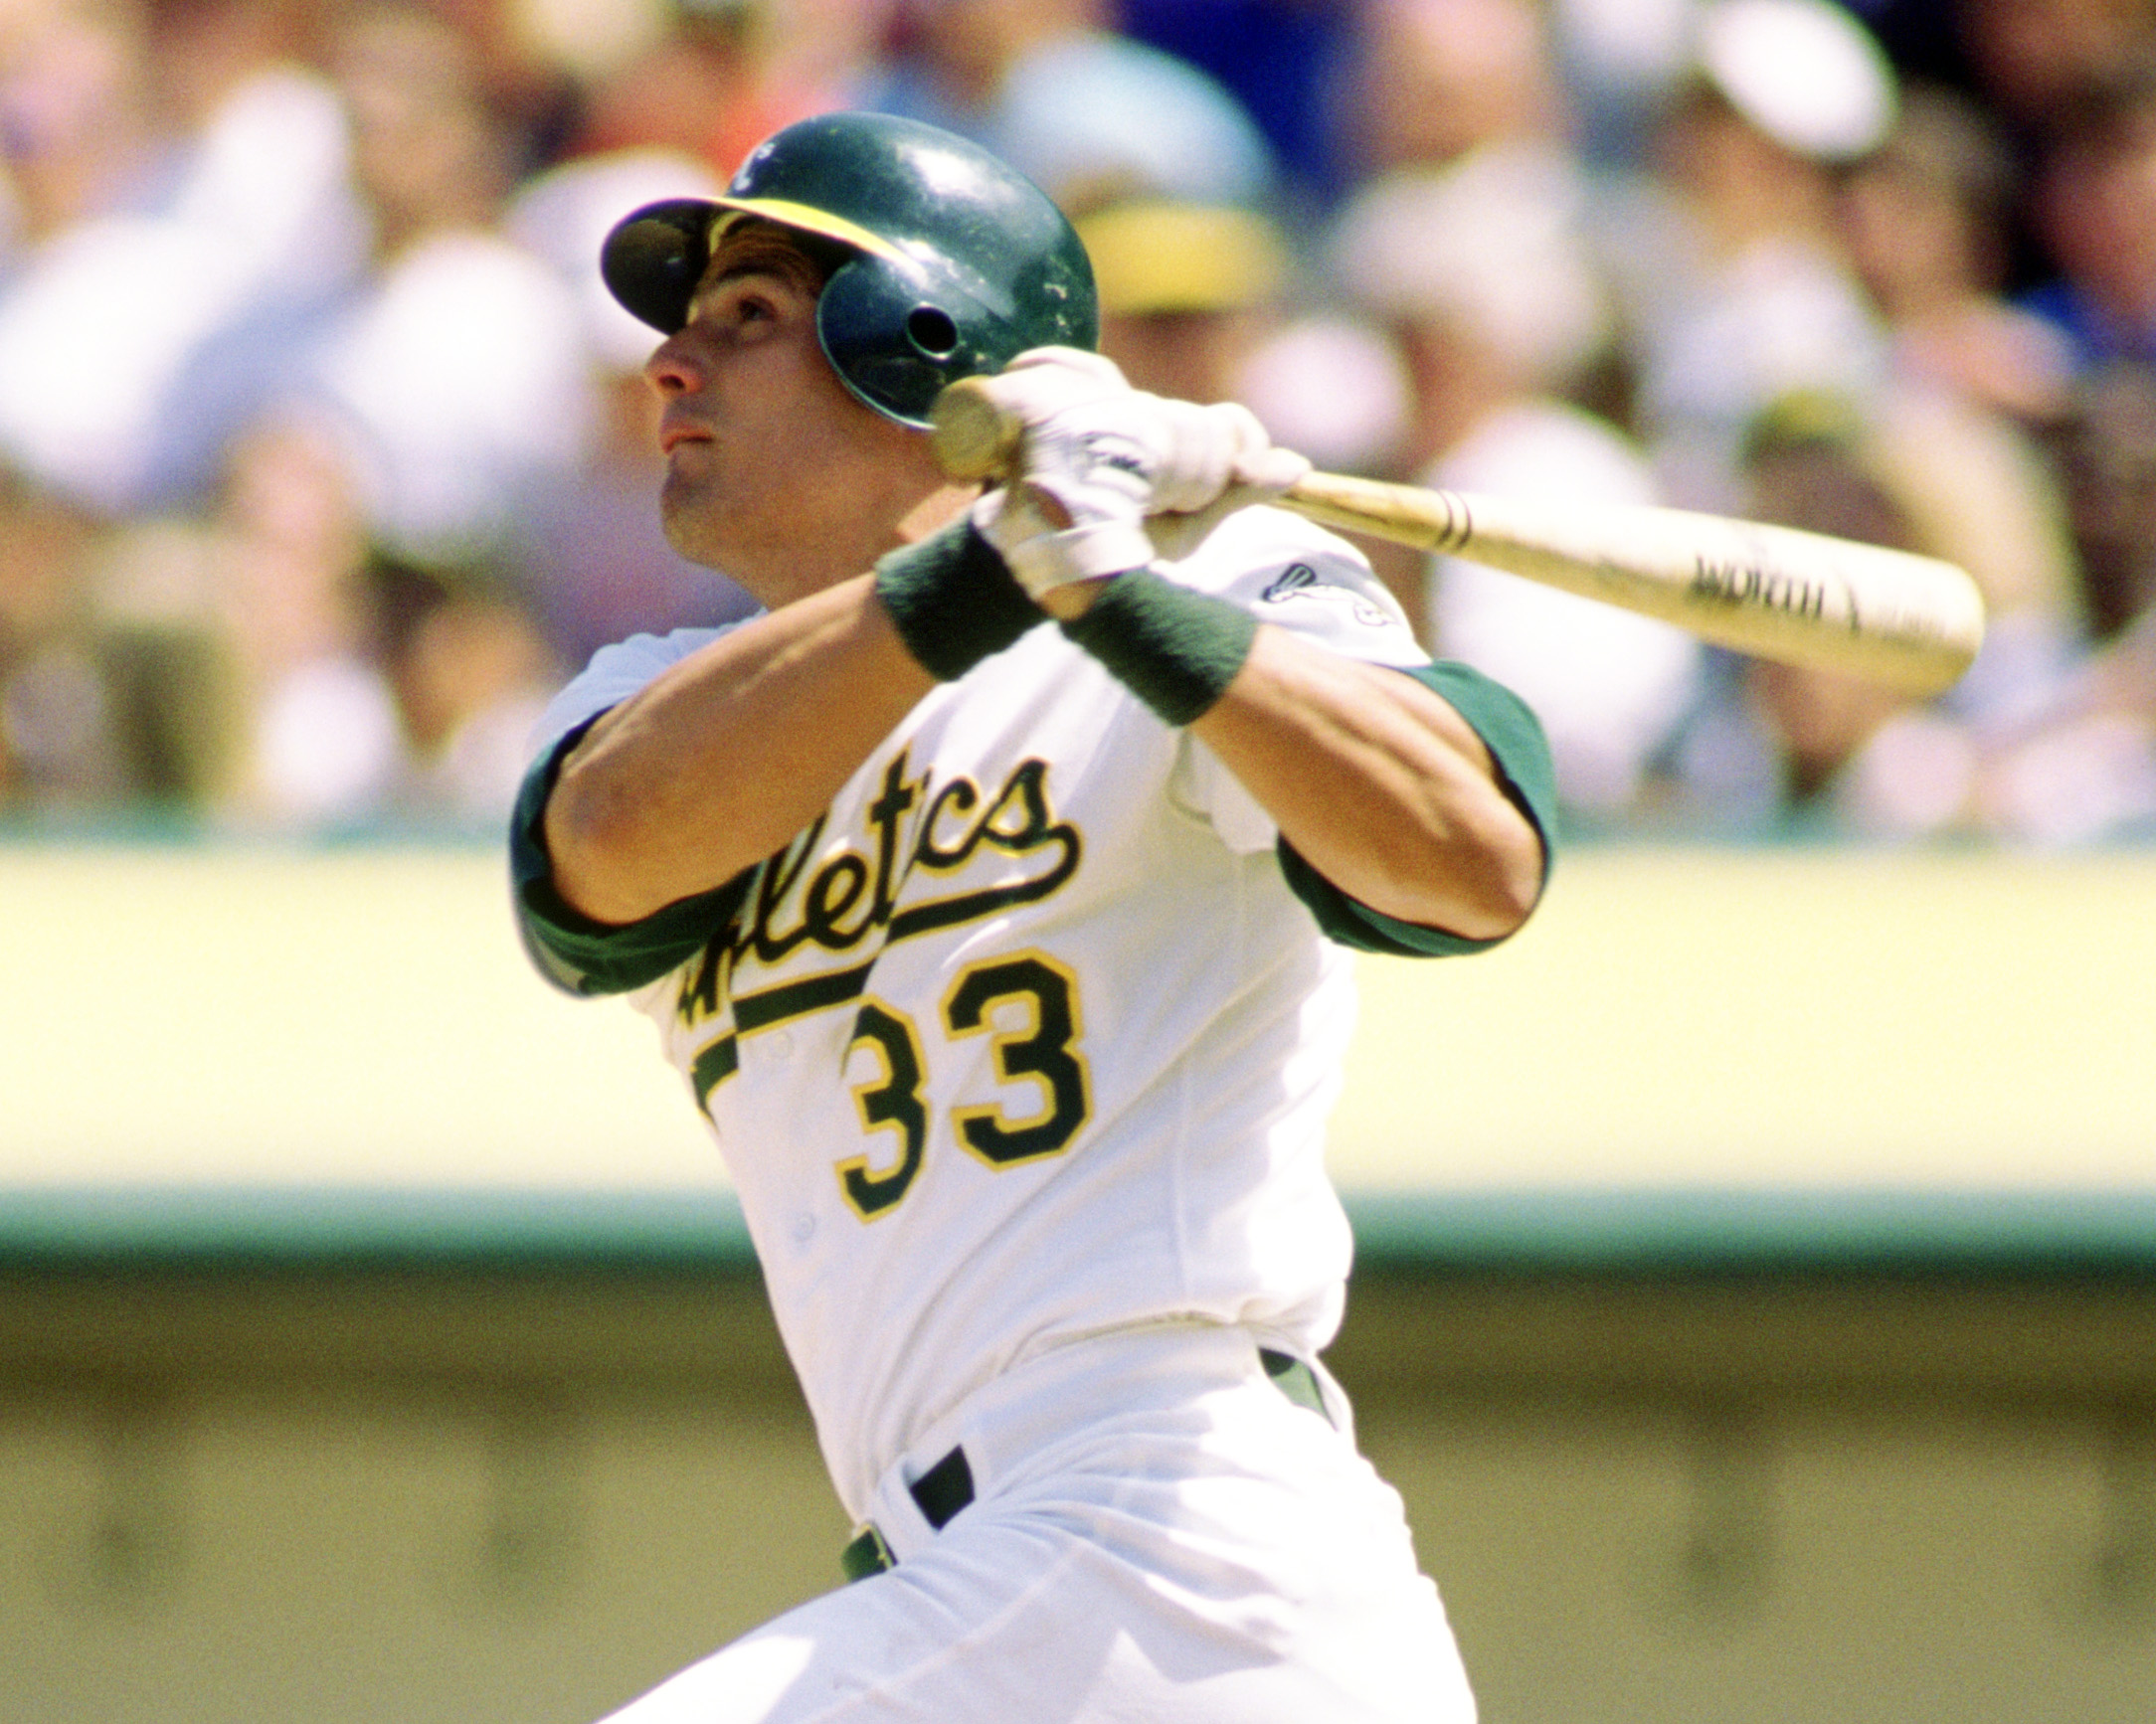 Jose Canseco’s Promise to His Dying Mother Triggered His Steroid Use